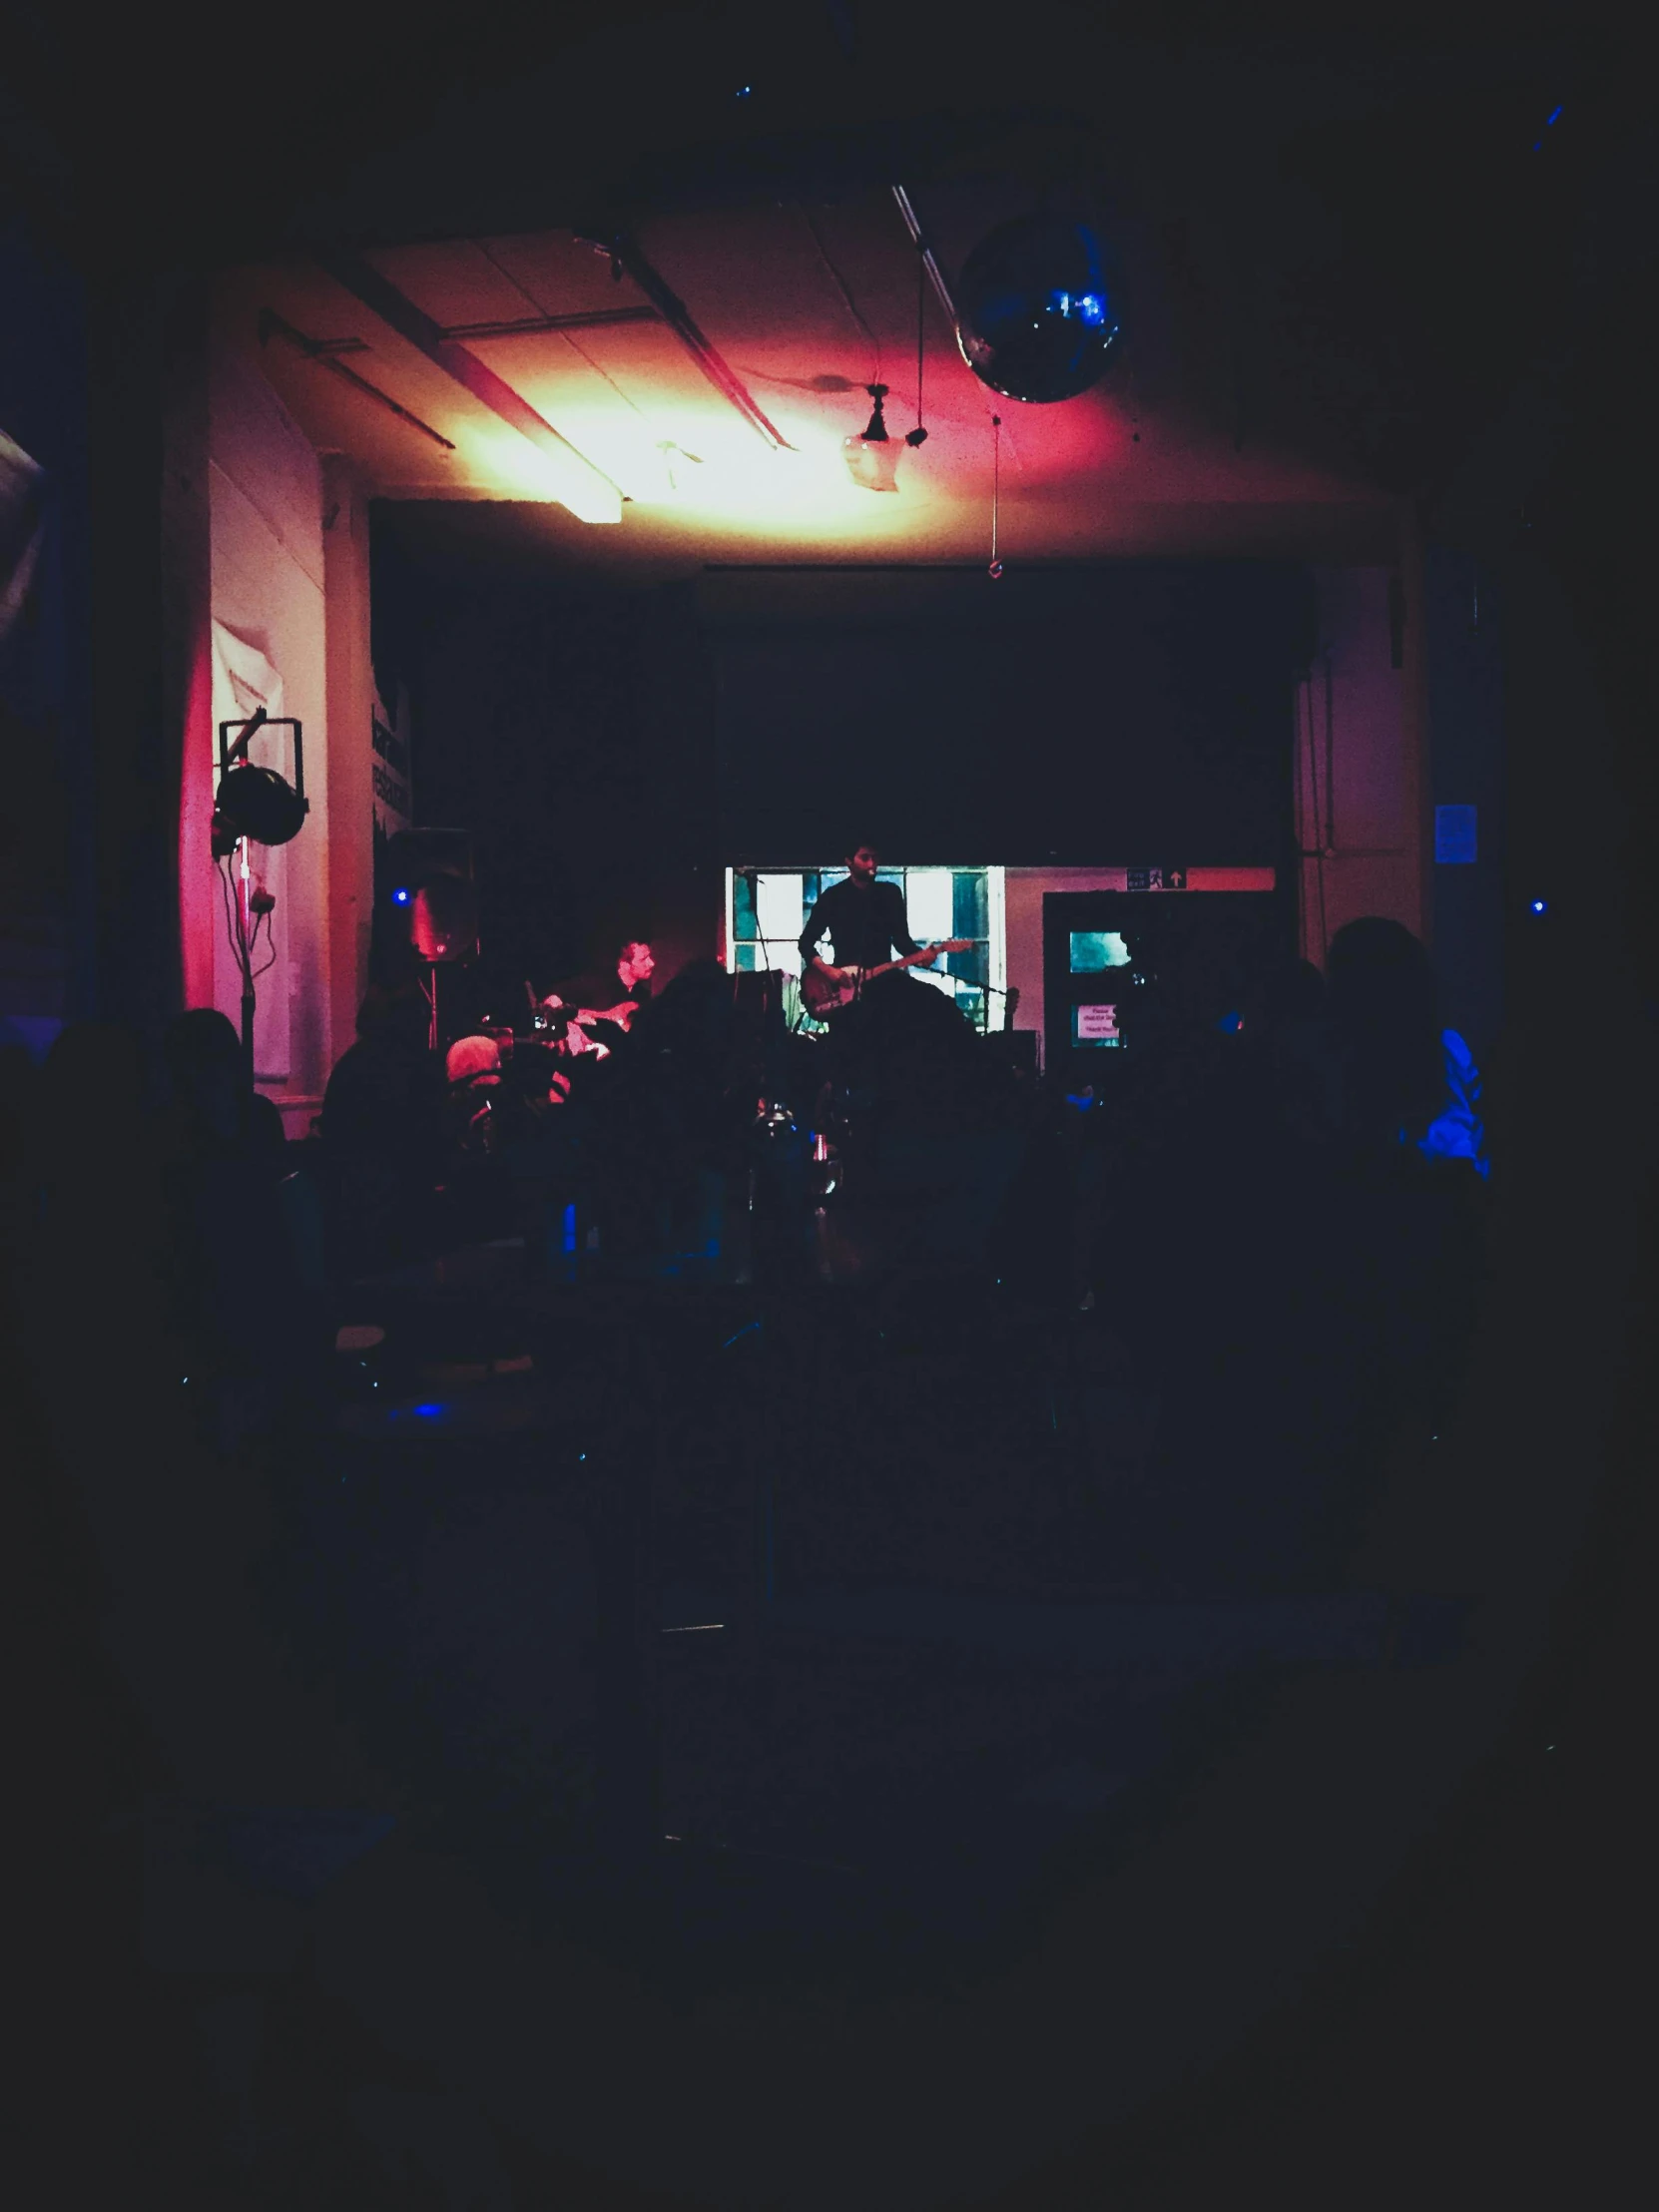 a group of people standing in a dark room, an album cover, unsplash, happening, live performance, low quality photo, full daylight, saturday night in a saloon